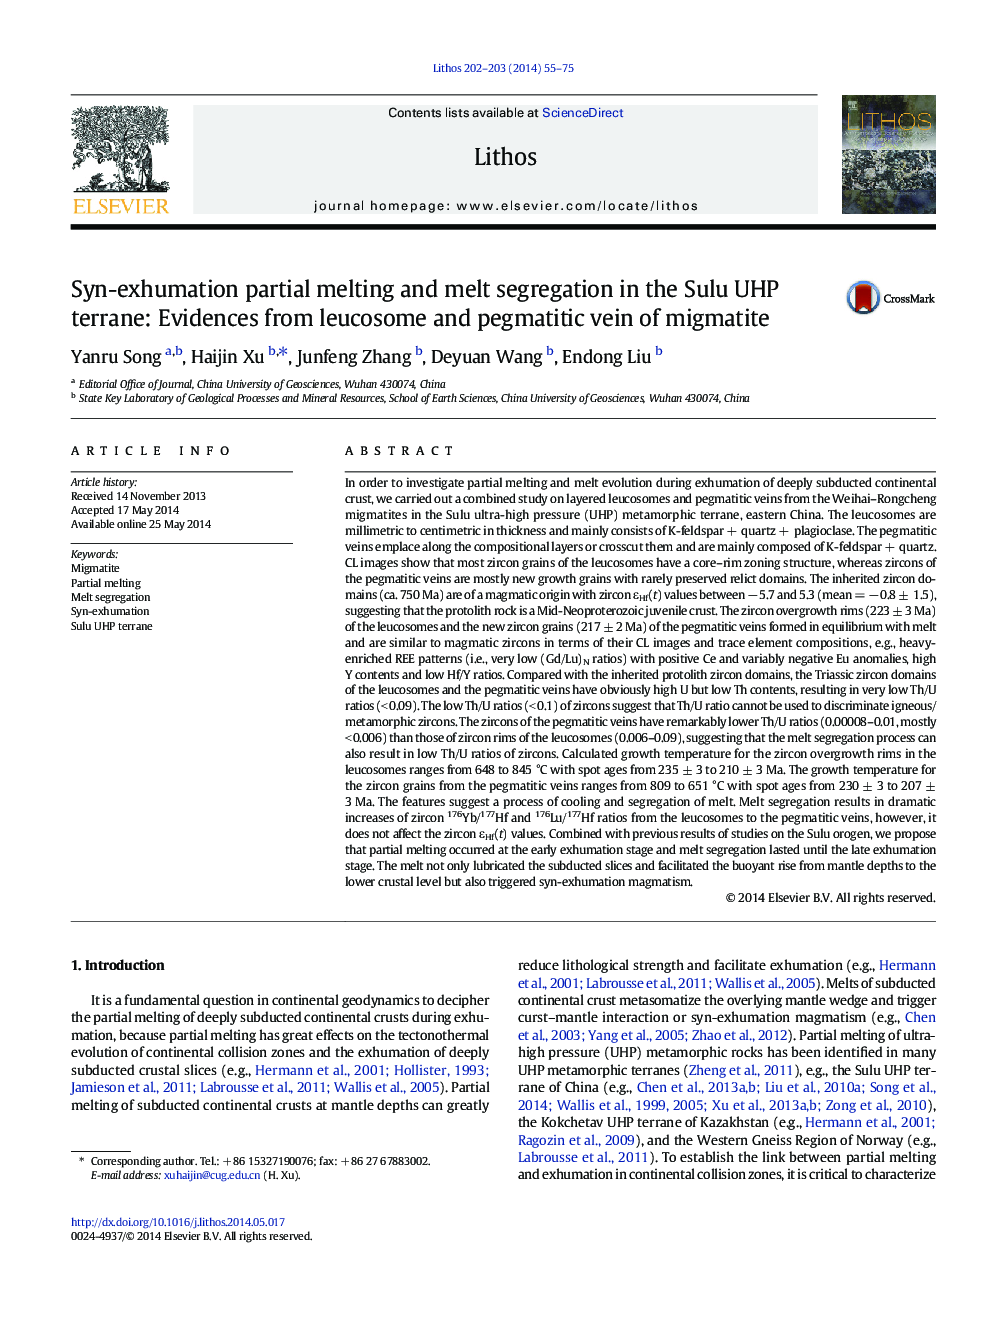 Syn-exhumation partial melting and melt segregation in the Sulu UHP terrane: Evidences from leucosome and pegmatitic vein of migmatite